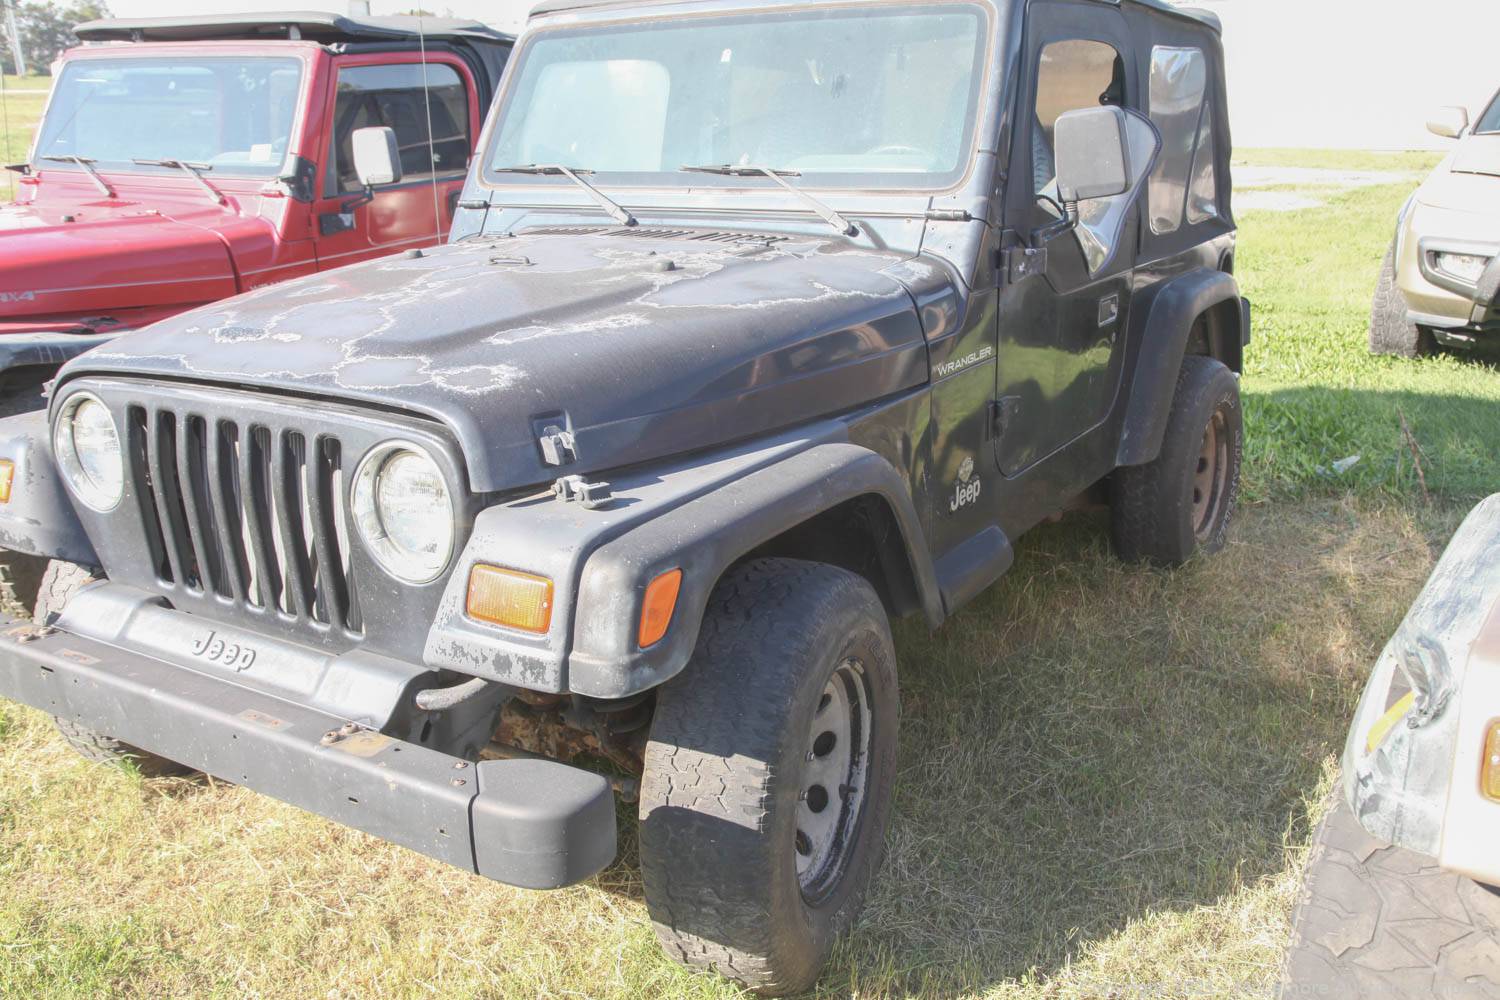 McLemore Auction Company - Auction: Four Classic Jeeps Including a 1990  Custom Wrangler with LS Swap ITEM: 1997 Black Jeep Wrangler  5sp VIN  1J4FY29P5VP521772 - BILL OF SALE ONLY